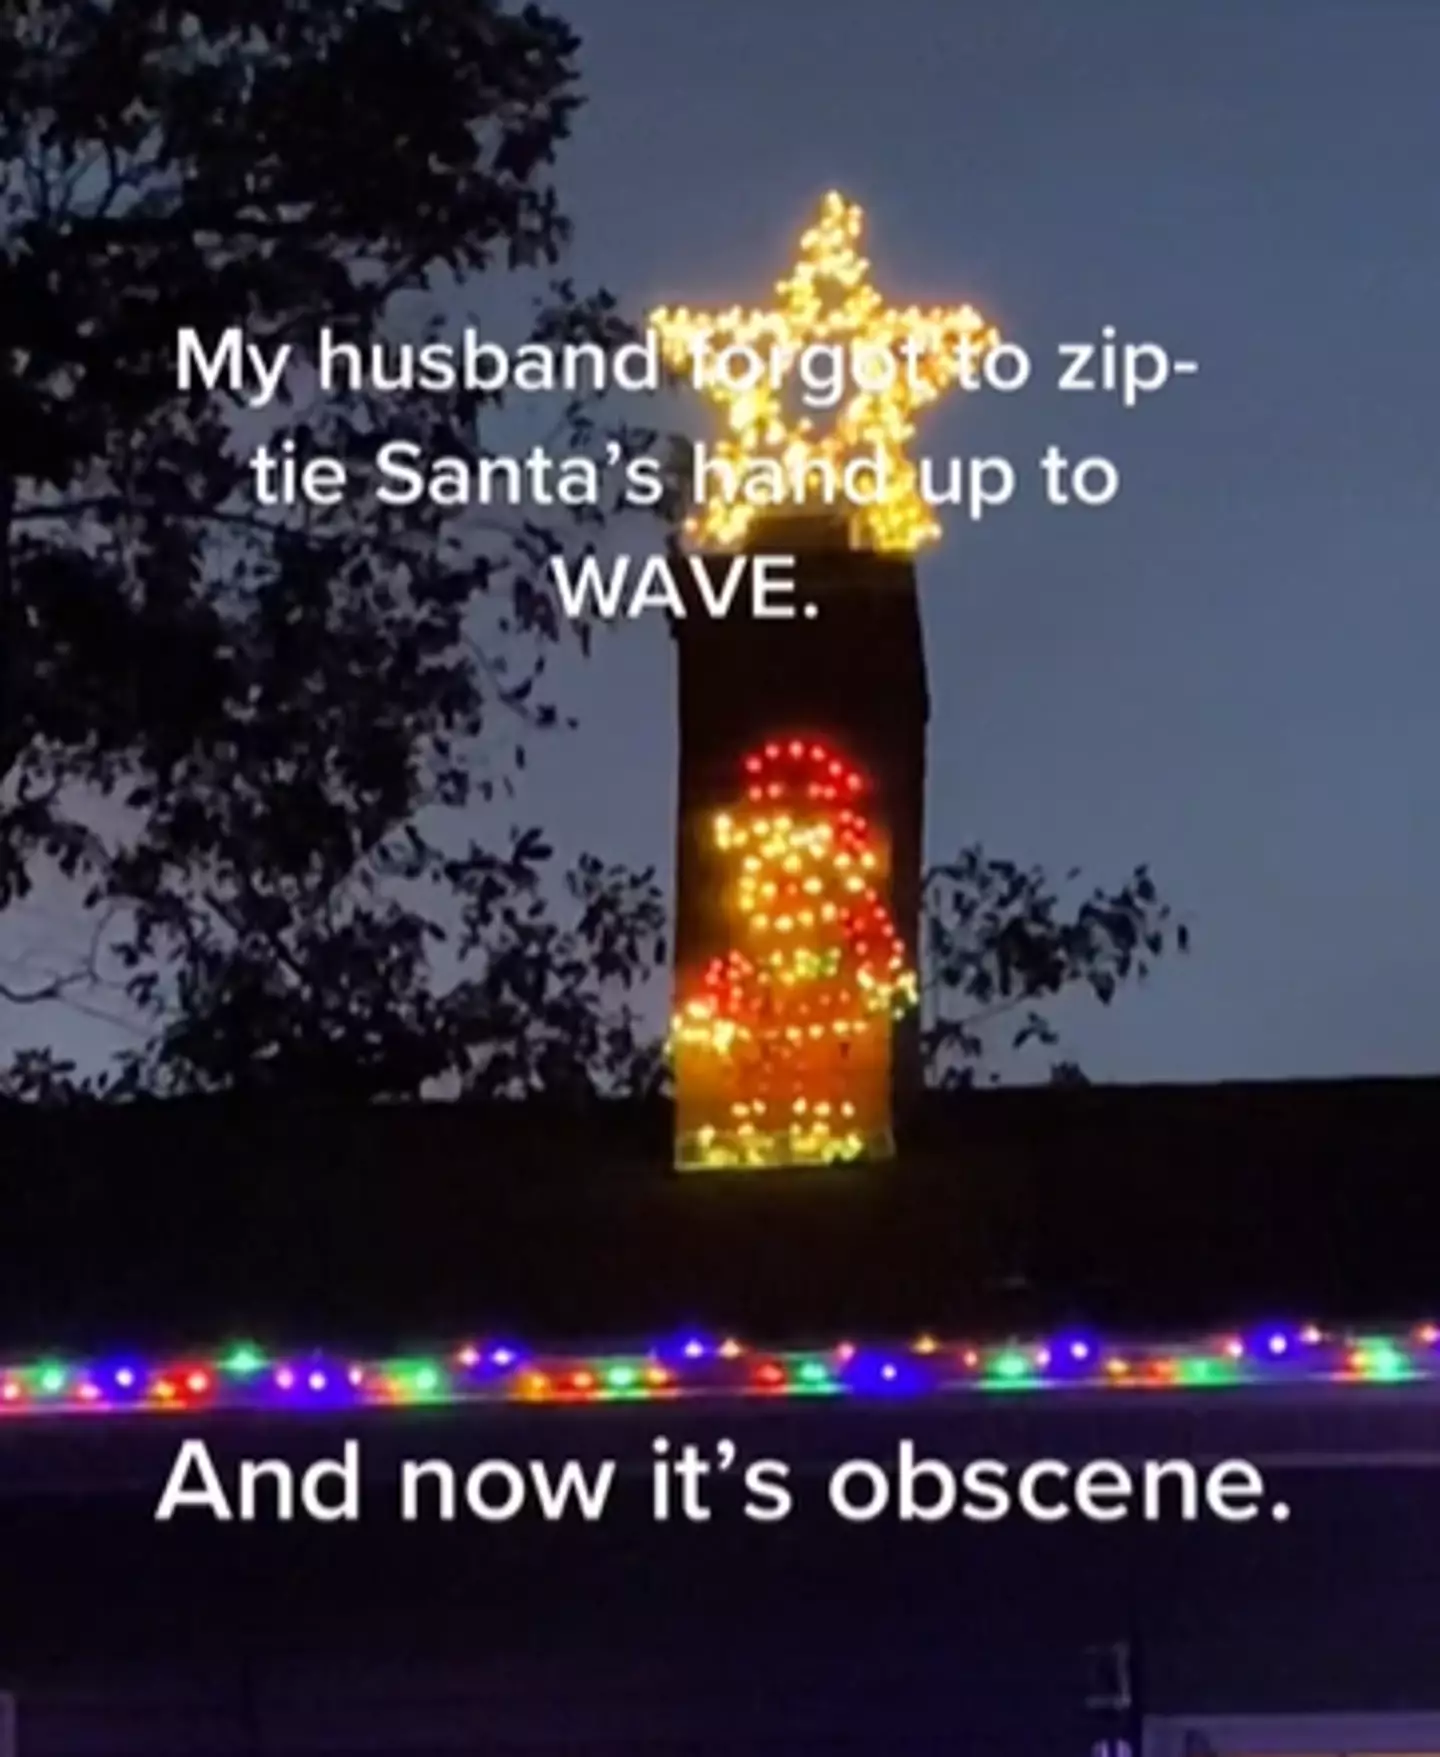 It appears as though Santa is 'jingling his bells' in this video (